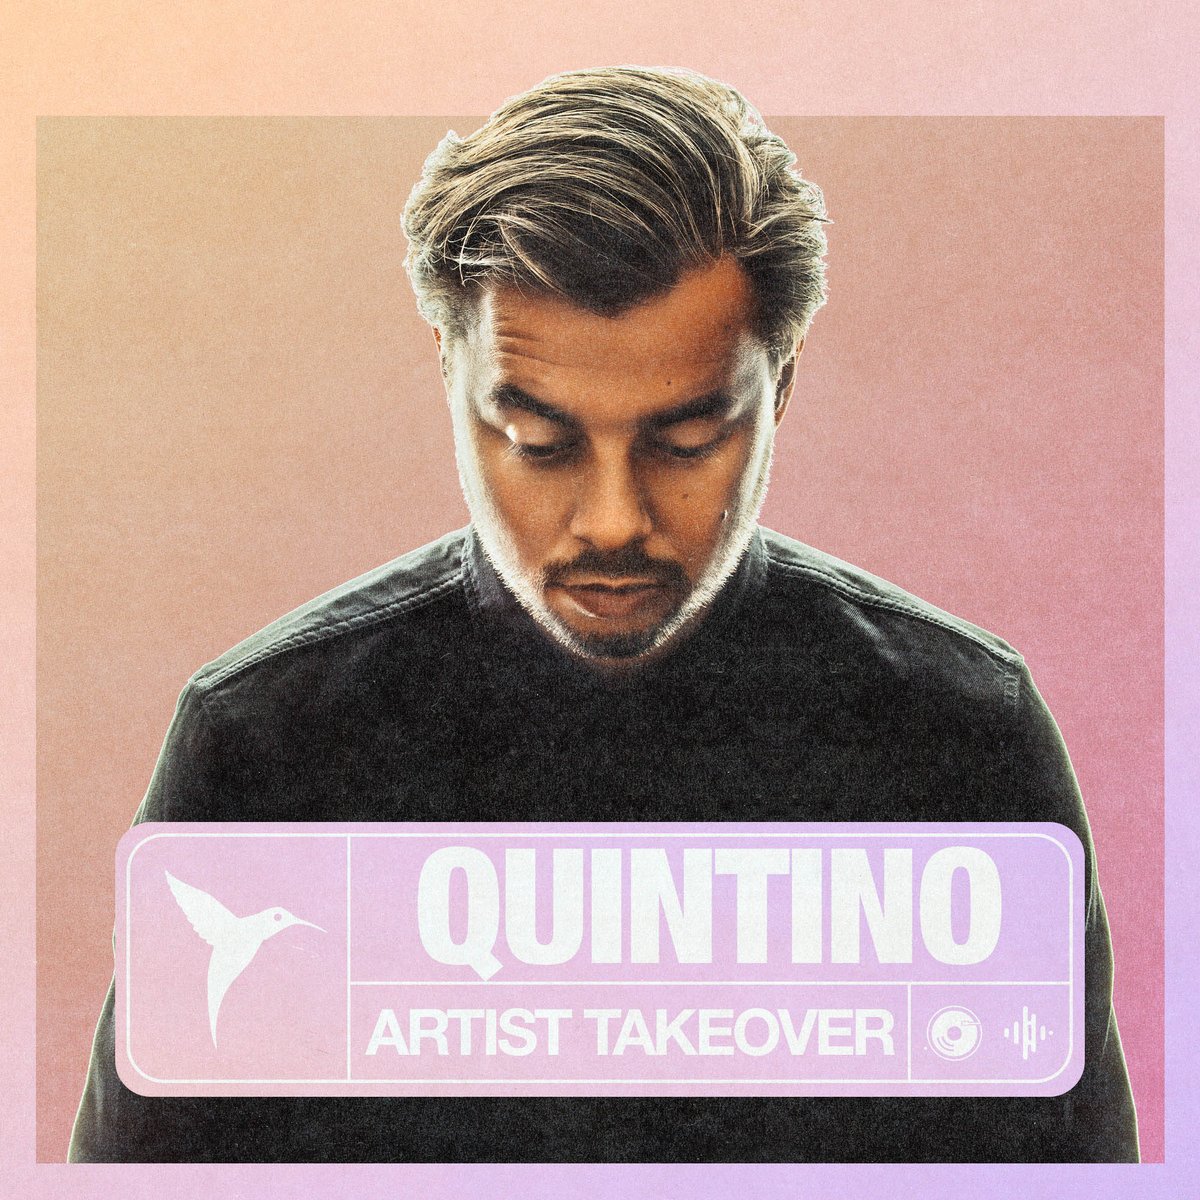 New playlist takeover alert! 🚨 🤩 @QUINTINOO took control of our Ushuaïa Ibiza official Spotify playlist and made a curated selection of tracks just for you ❤️ Play it out loud here: l.ushuaiaibiza.com/3L7yjG